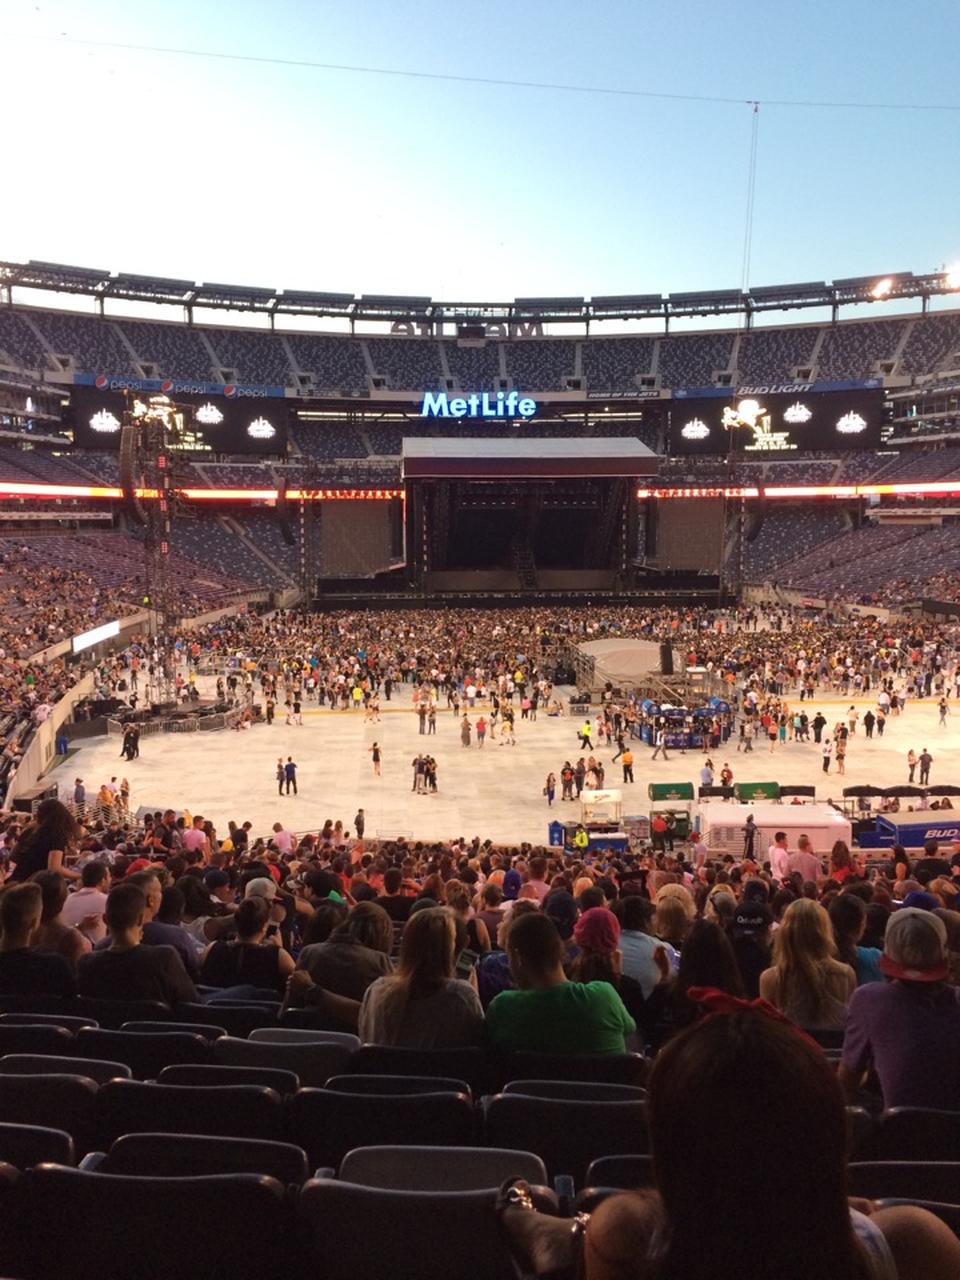 section 128, row 38 seat view  for concert - metlife stadium